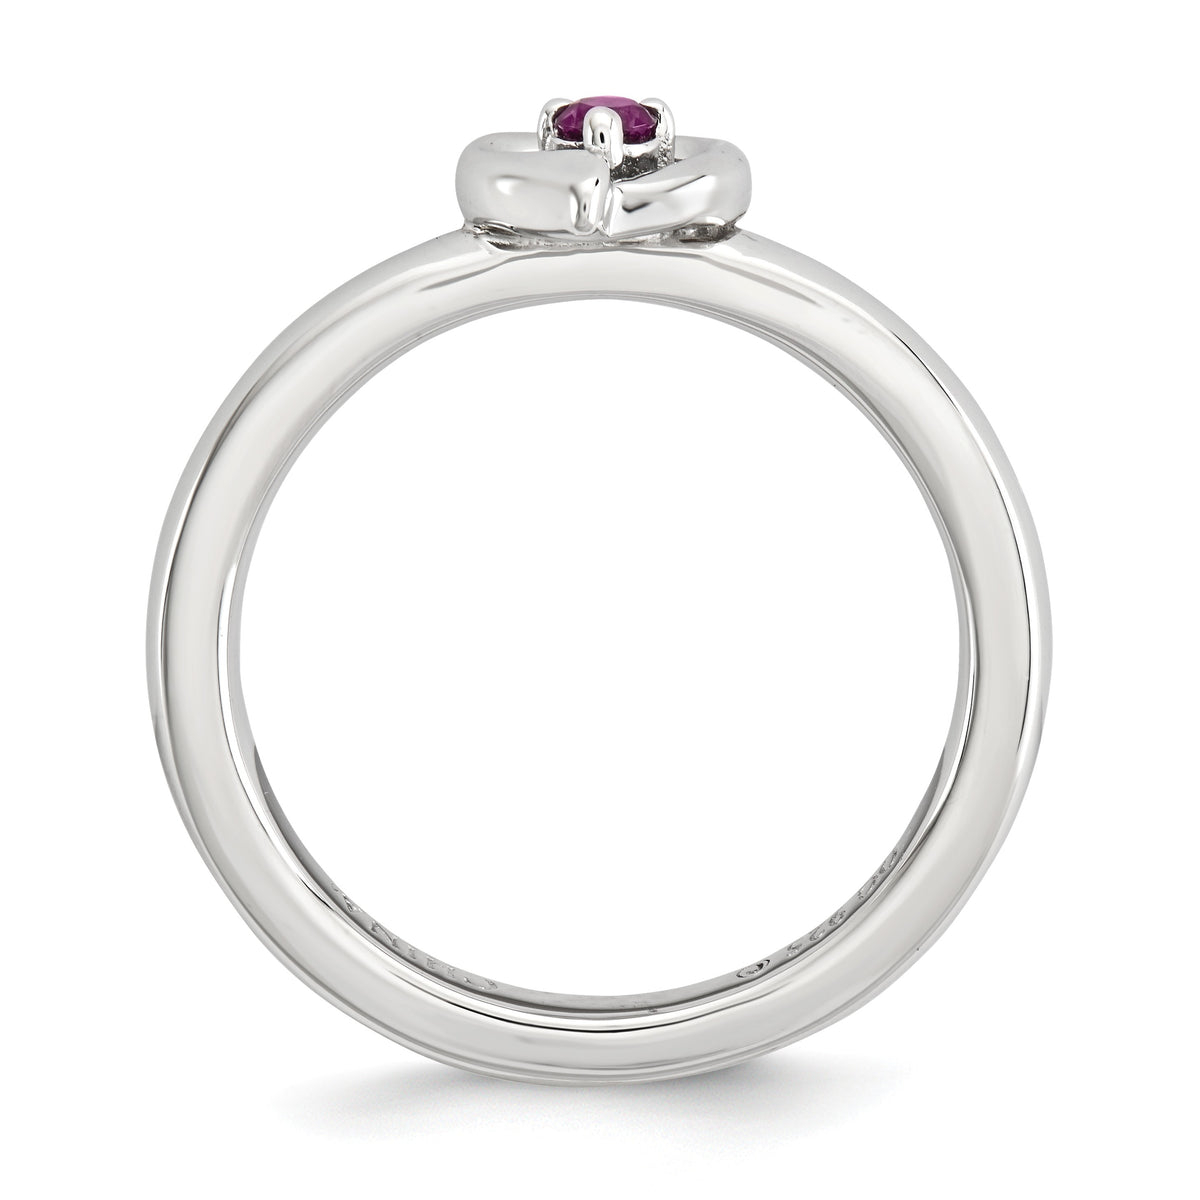 Alternate view of the Sterling Silver Stackable Expressions Rhodolite Garnet 6mm Heart Ring by The Black Bow Jewelry Co.